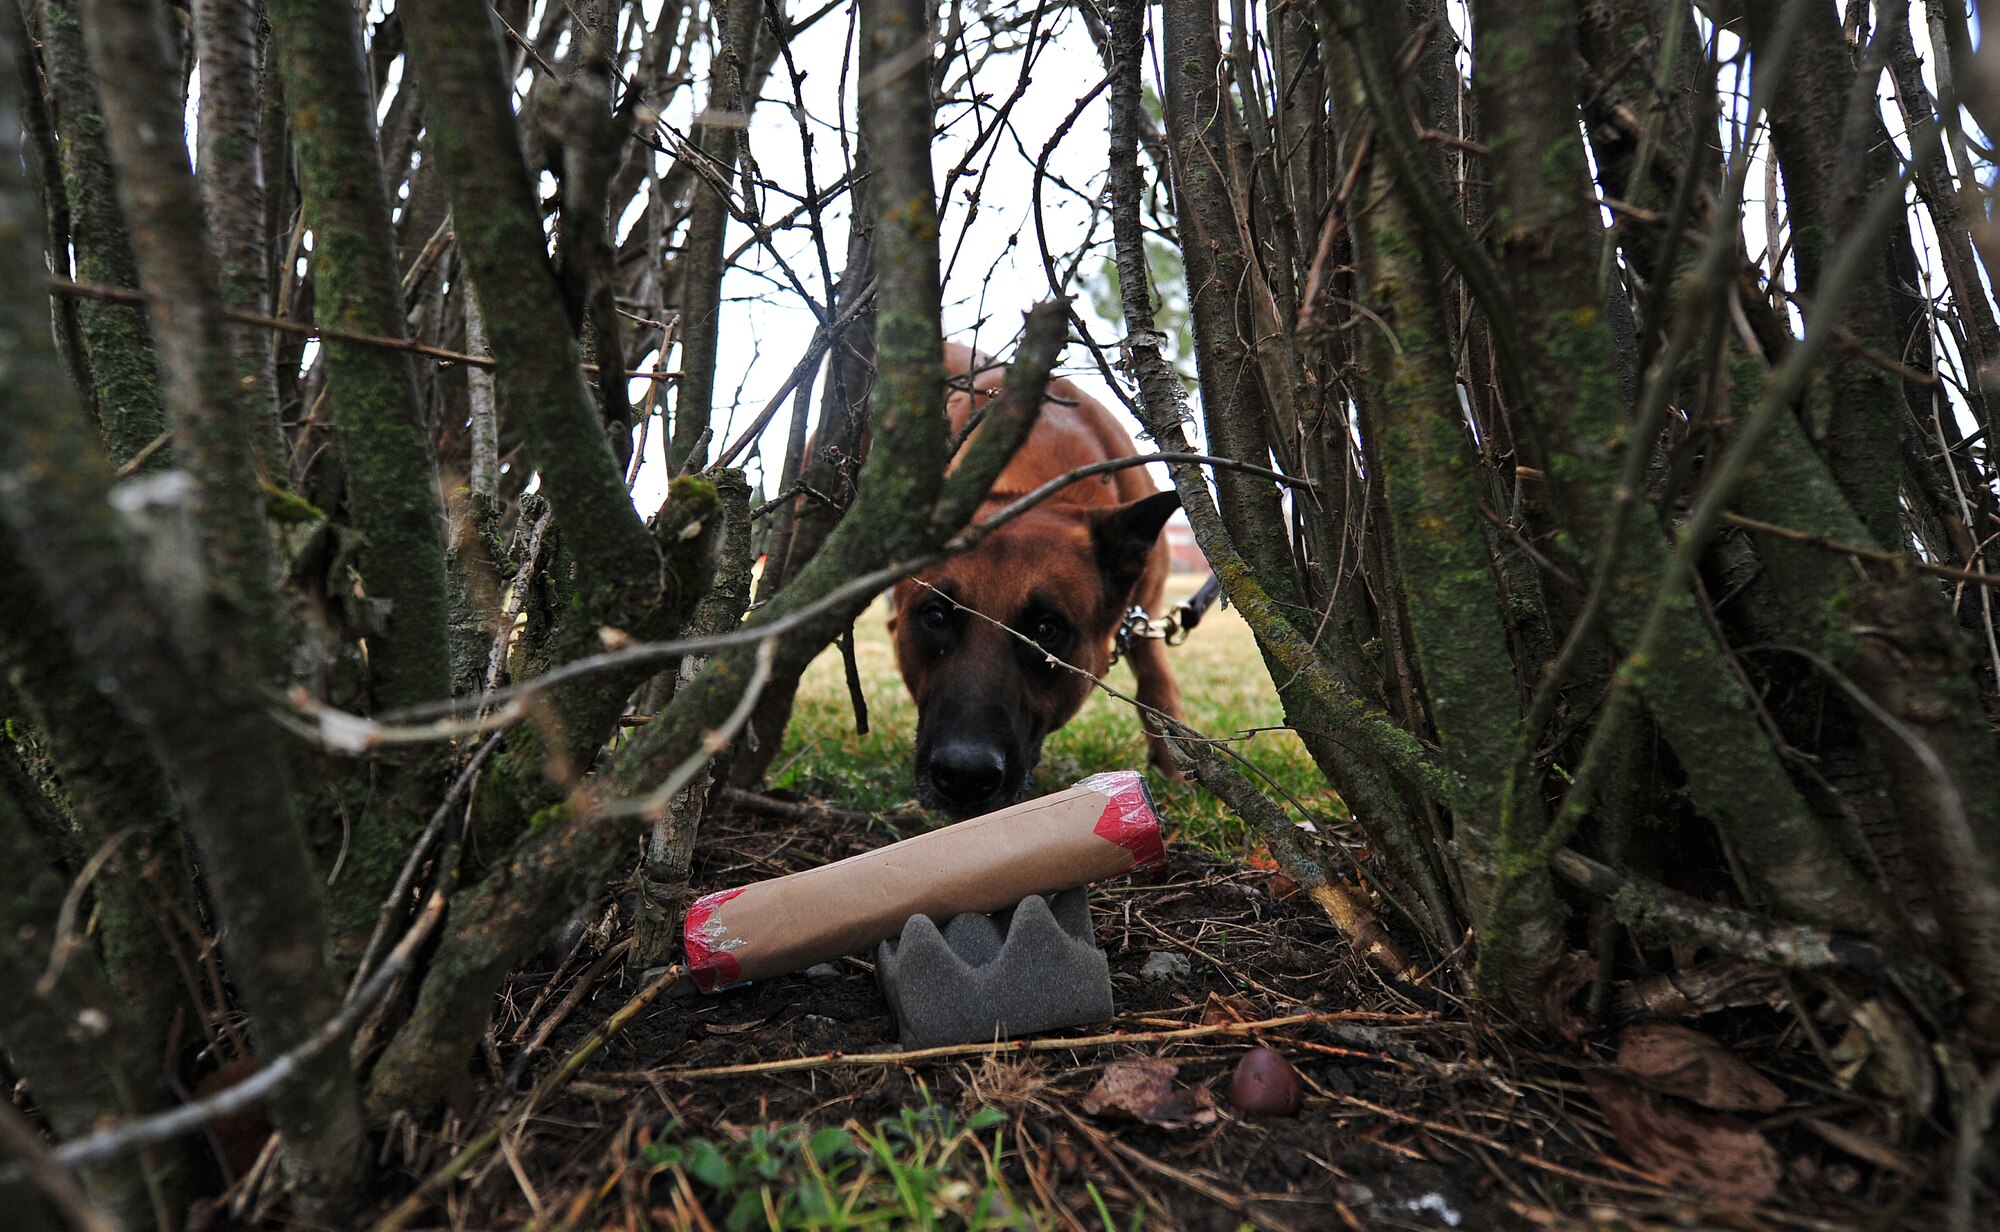 Uutah searches through shrubbery to locate a simulated suspicious odor during training at the K-9 confidence course at Fairchild Air Force Base, Wash., March 20, 2013. Military working dogs go through a training course at Joint Base San Antonio/Lackland where they are trained for detection of explosives or illegal contraband. Uutah is a Belgian Malinois military working dog assigned to the 92nd Security Forces Squadron. (U.S. Air Force photo by Senior Airman Taylor Curry)